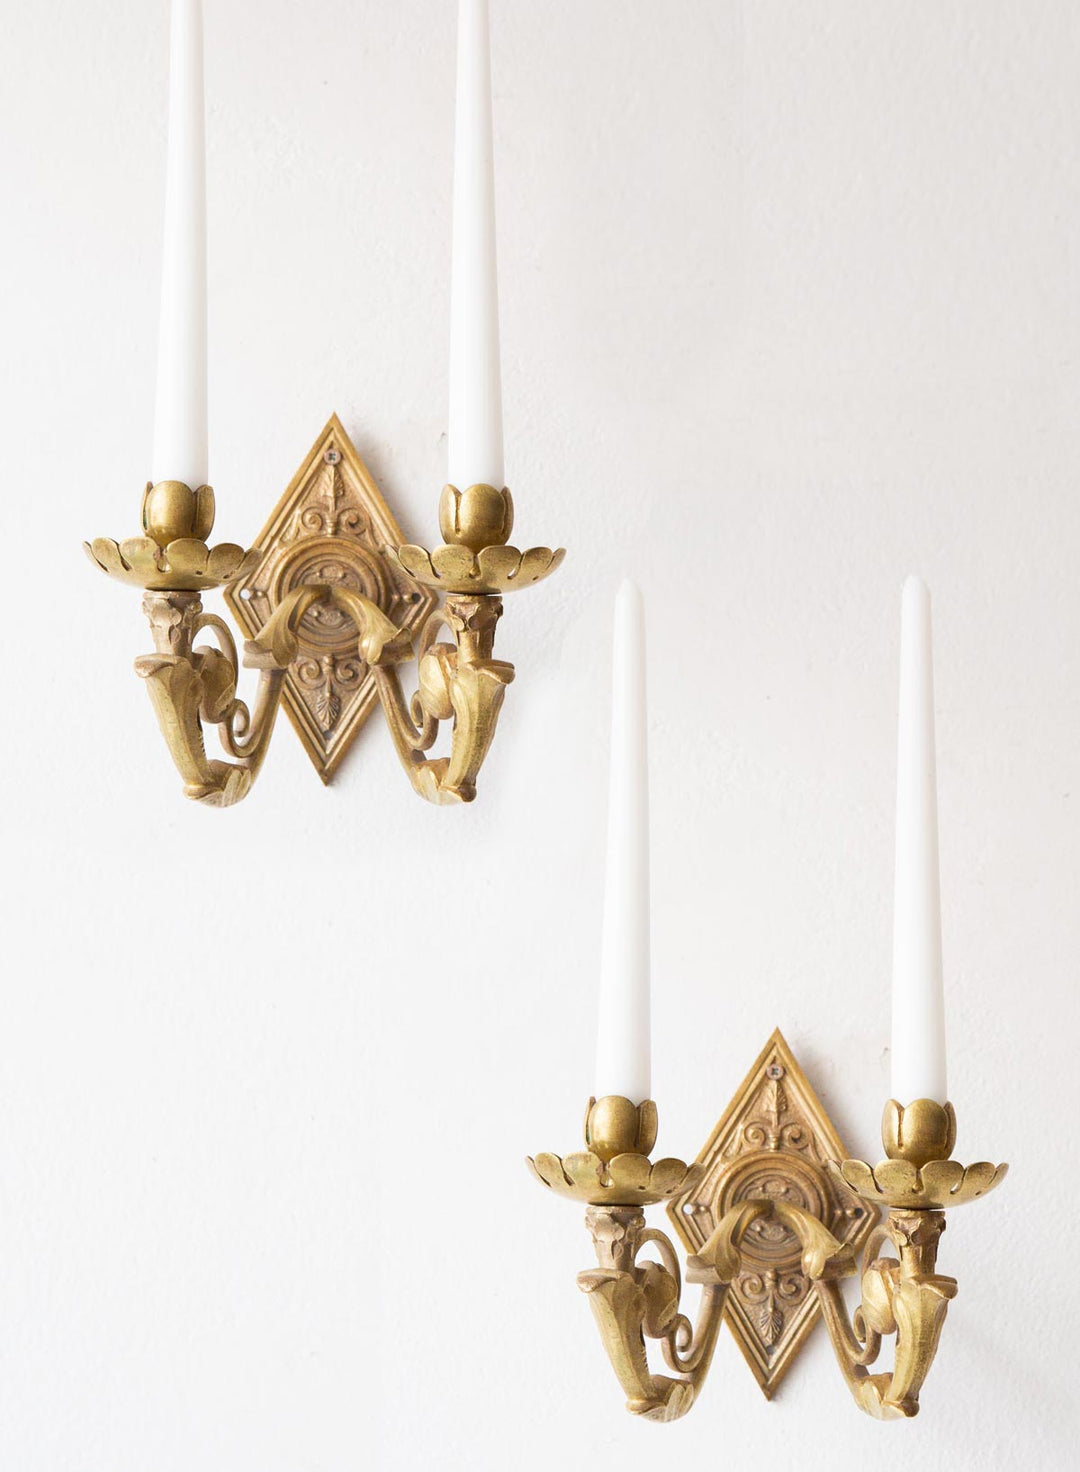 Pareja antiguos candelabros de pared franceses pair of french wall candleholders